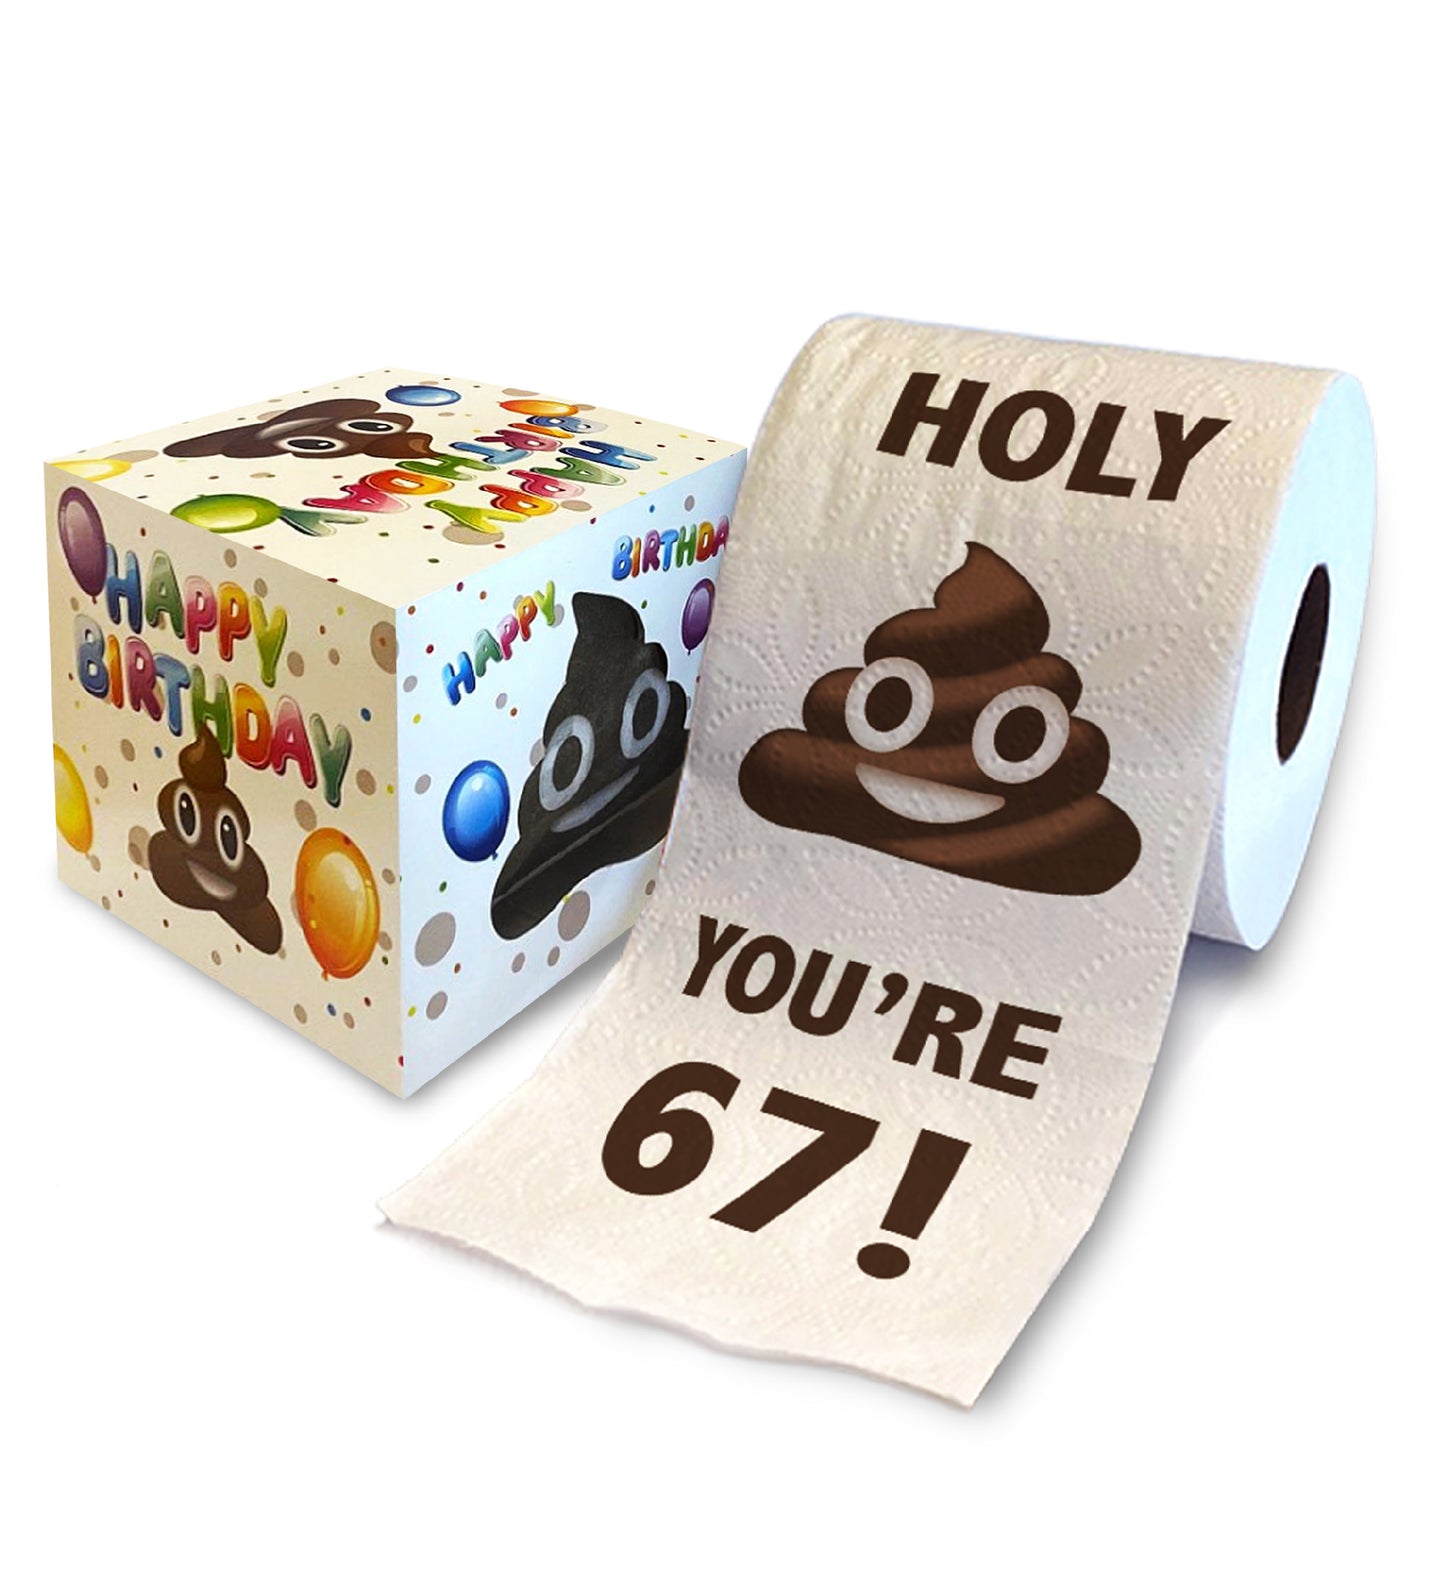 Printed TP Holy Poop You're 67 Funny Toilet Paper Roll Birthday Party Gag Gift